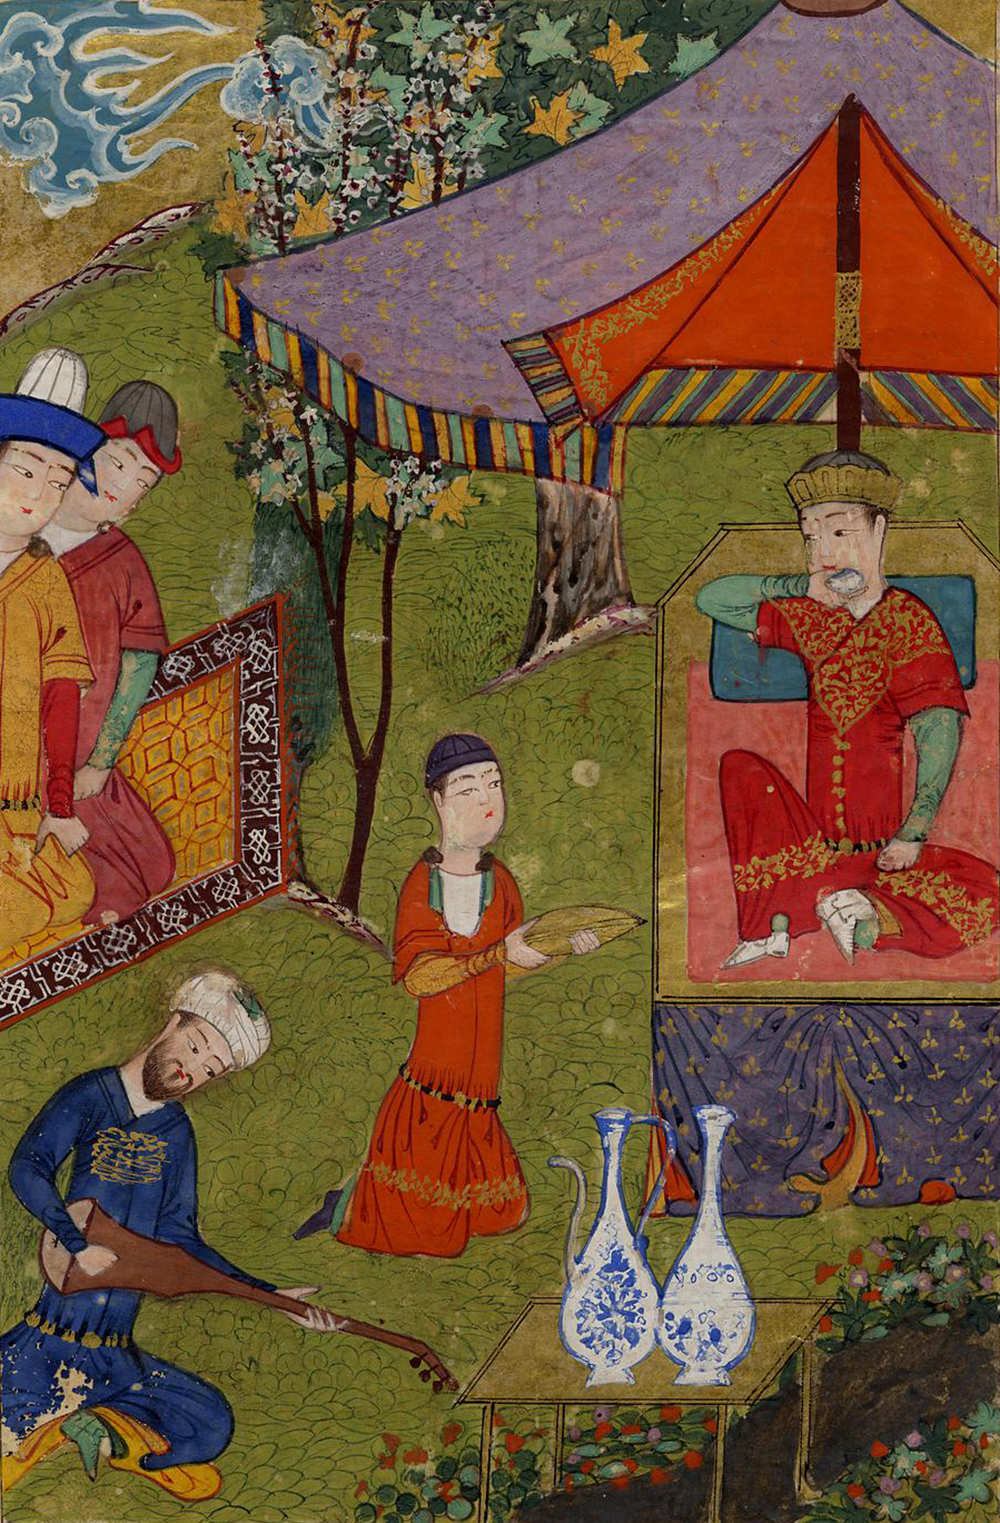 Manuscript page showing the enthronement of Güyük as Great Khan, from Tarikh-i Jahan-Gushay (History of the World Conqueror), by ʿAta Malik Juvayni, 1438. The British Museum.